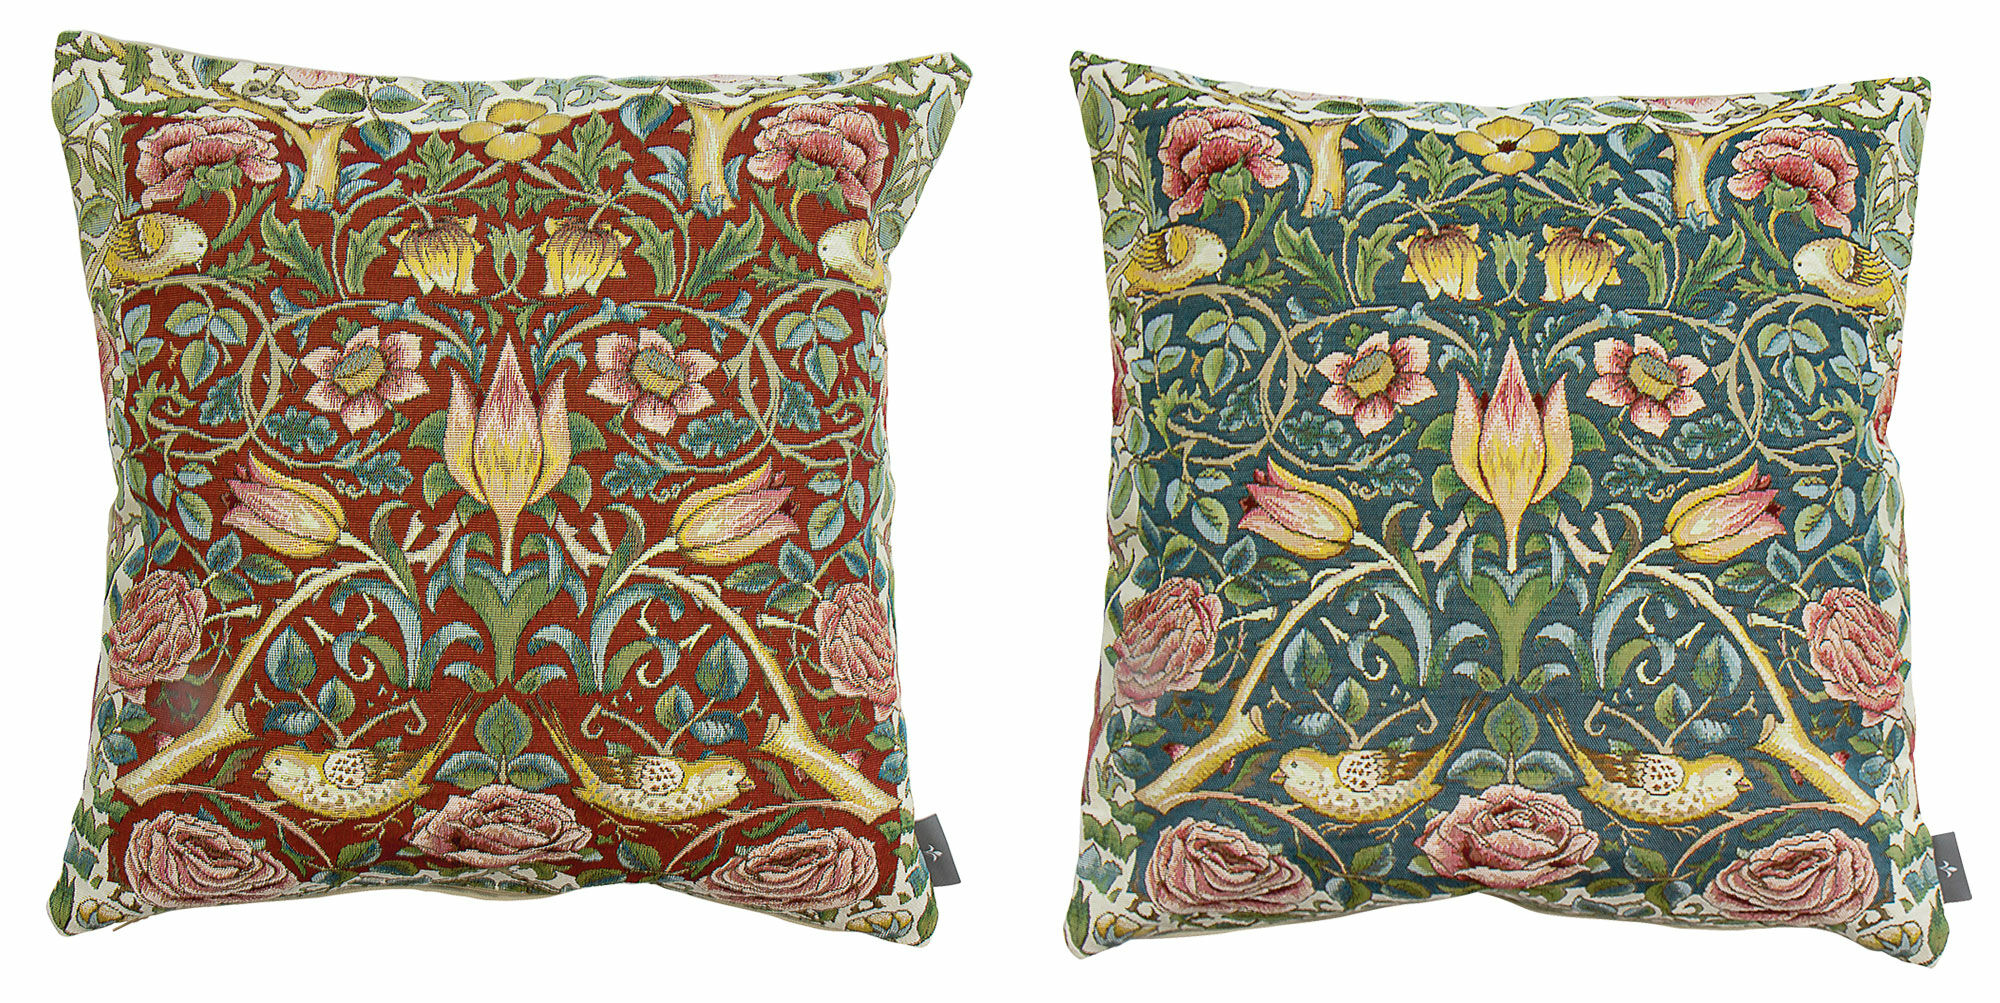 Set of 2 cushion covers "Roses and Birds" - after William Morris